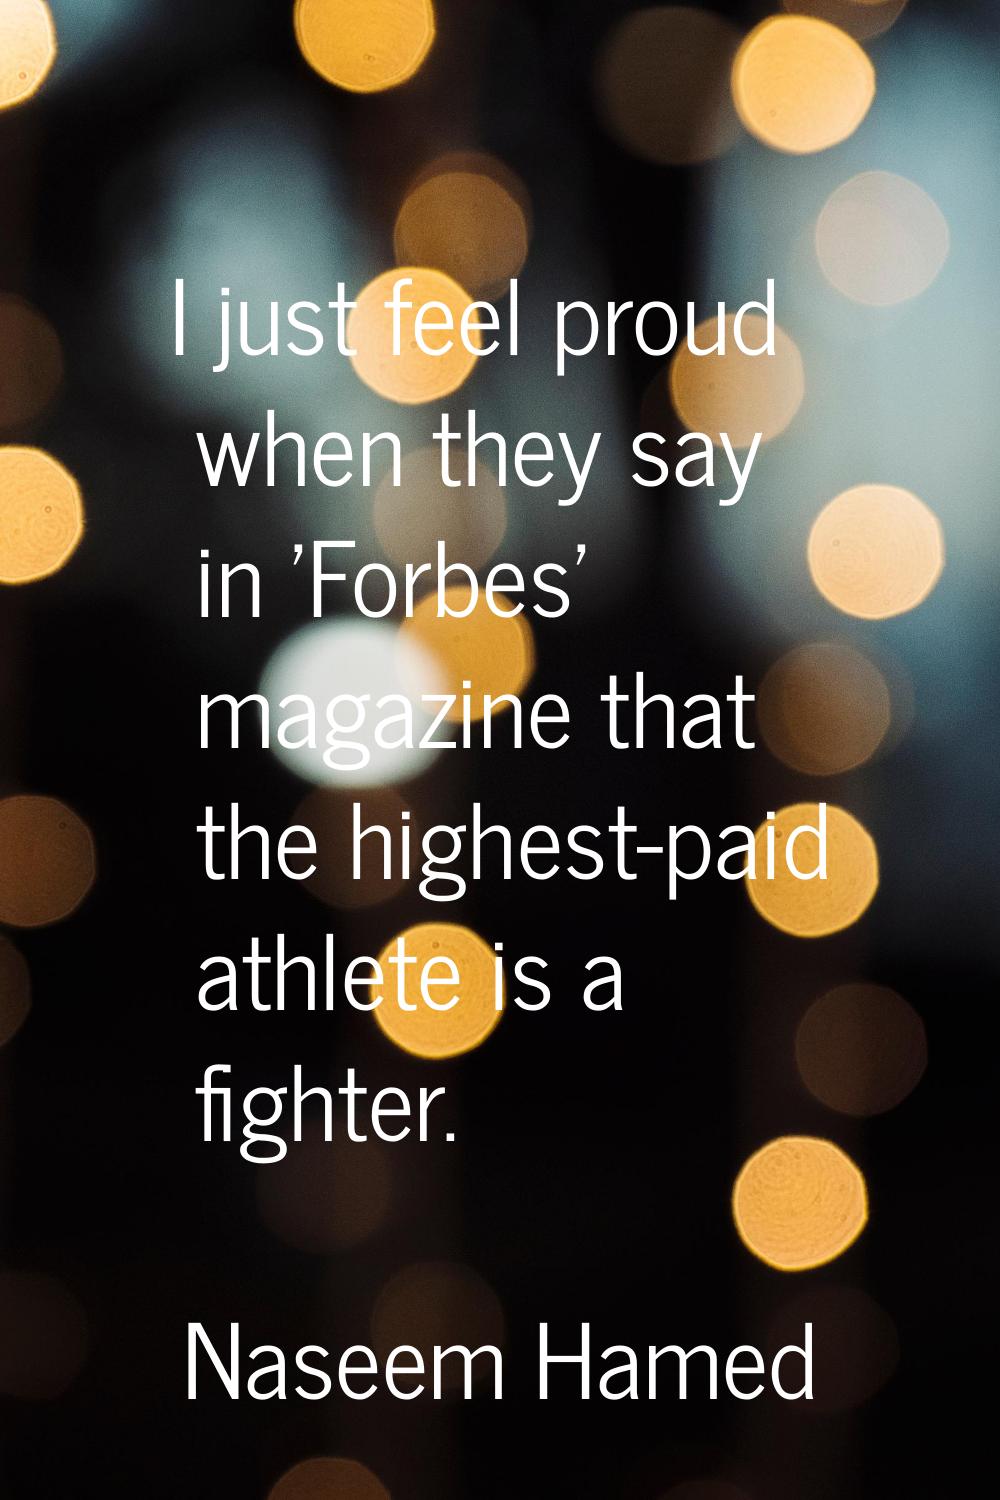 I just feel proud when they say in 'Forbes' magazine that the highest-paid athlete is a fighter.